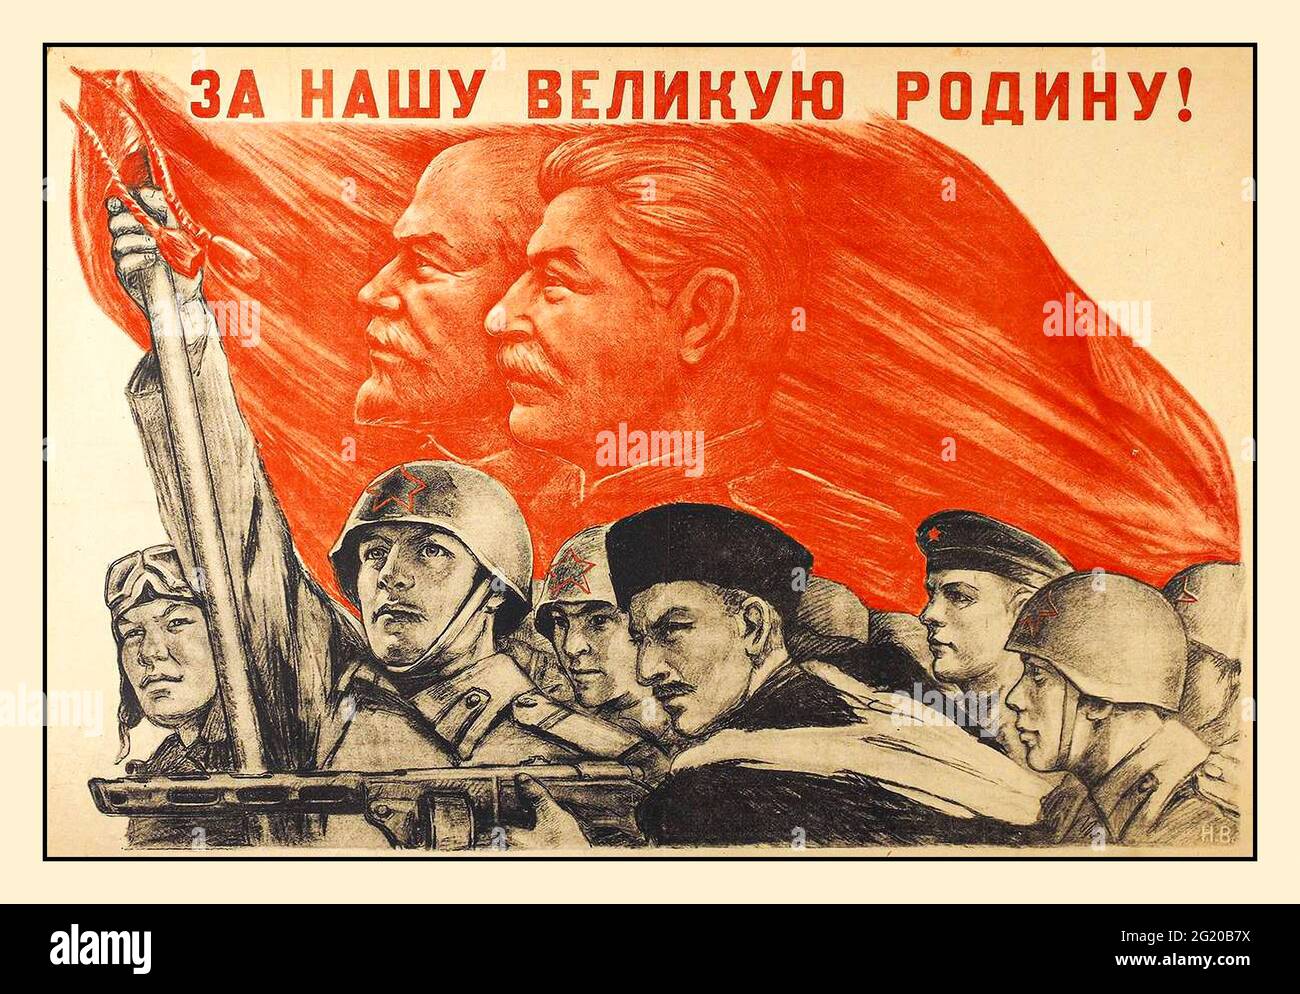 Vintage Russian Soviet WW2 Propaganda Poster FOR OUR GREAT HOMELAND !,  A 1944 Soviet Propaganda Poster World War II 1944 featuring Lenin and Stalin on a red banner flag, with Russian fighting forces illustrated in foreground. Artist Nina Vatolina Russian, Stock Photo